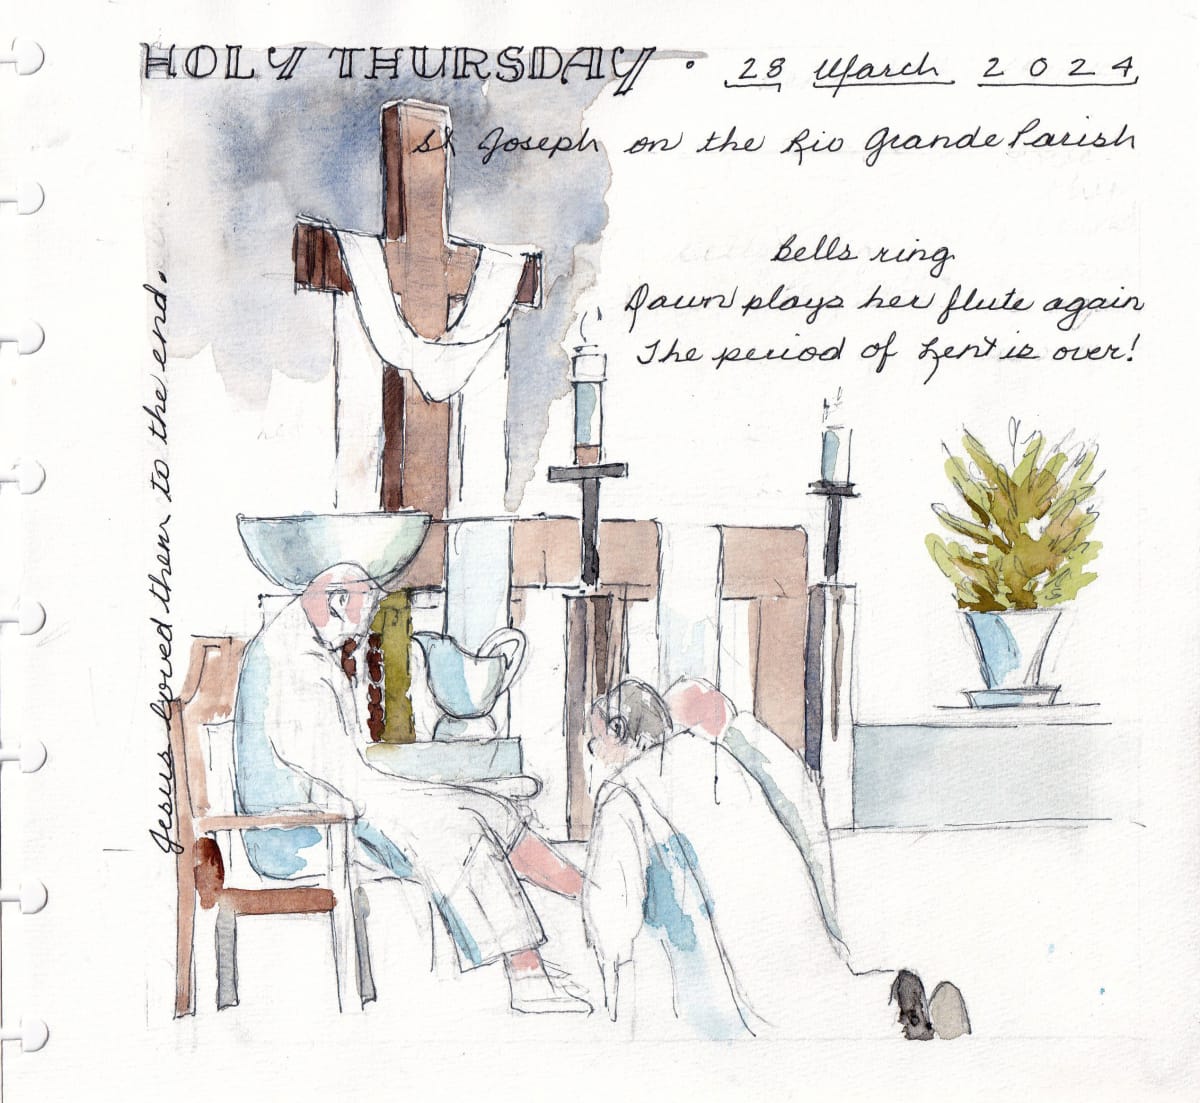 Journey Daybook Page by Margaret Pulis Herrick (Peggy)  Image: Holy Thursday